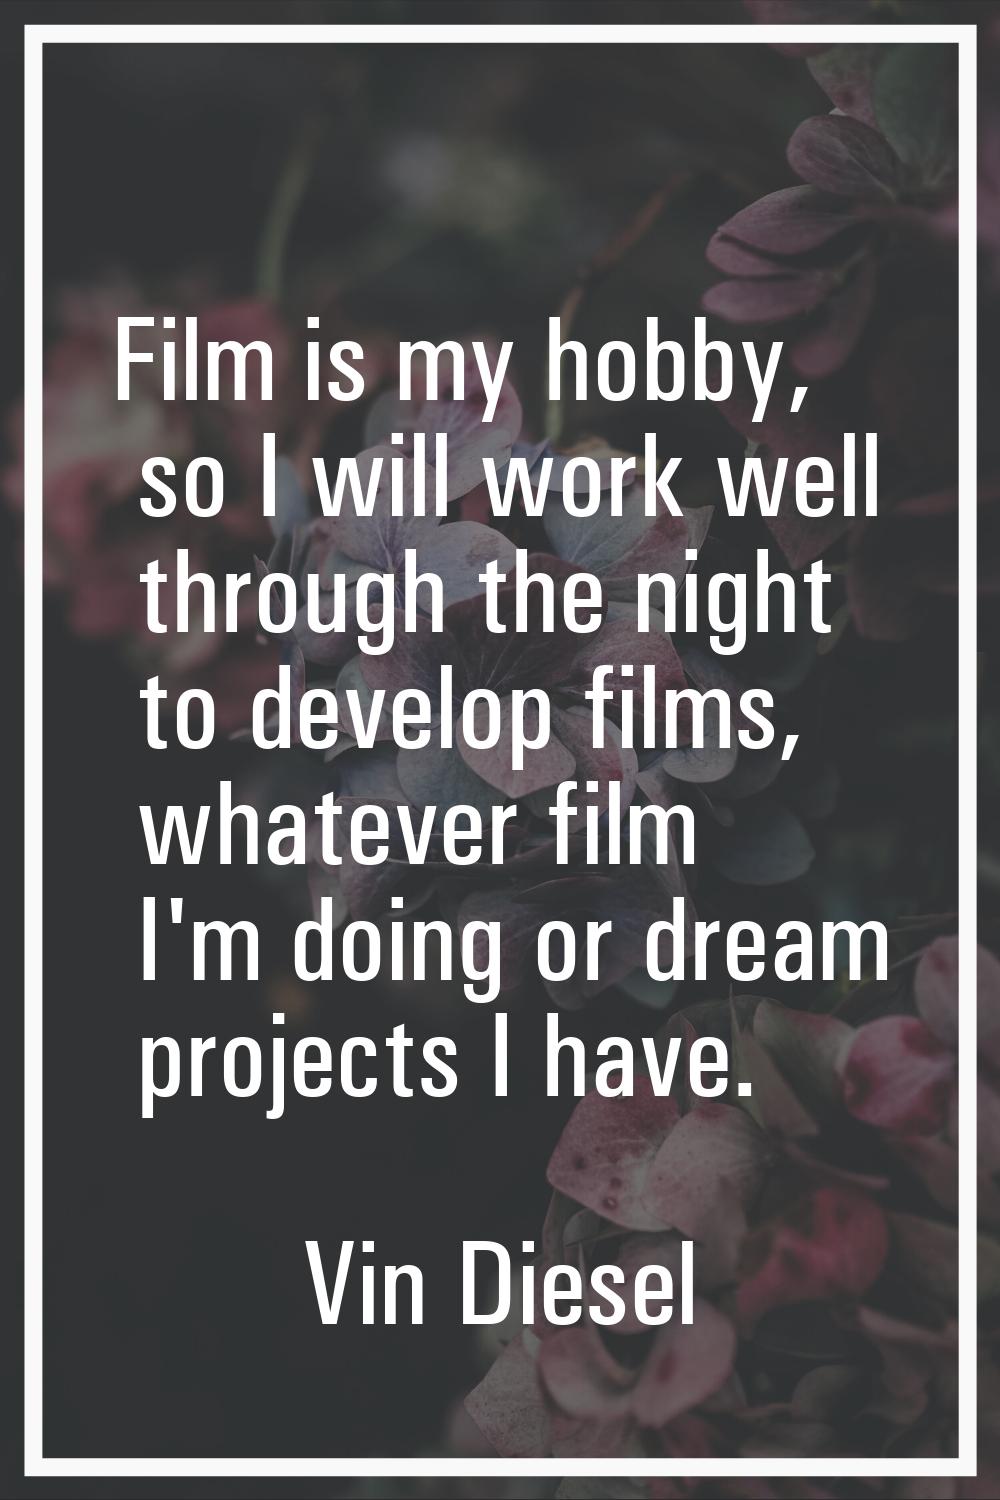 Film is my hobby, so I will work well through the night to develop films, whatever film I'm doing o